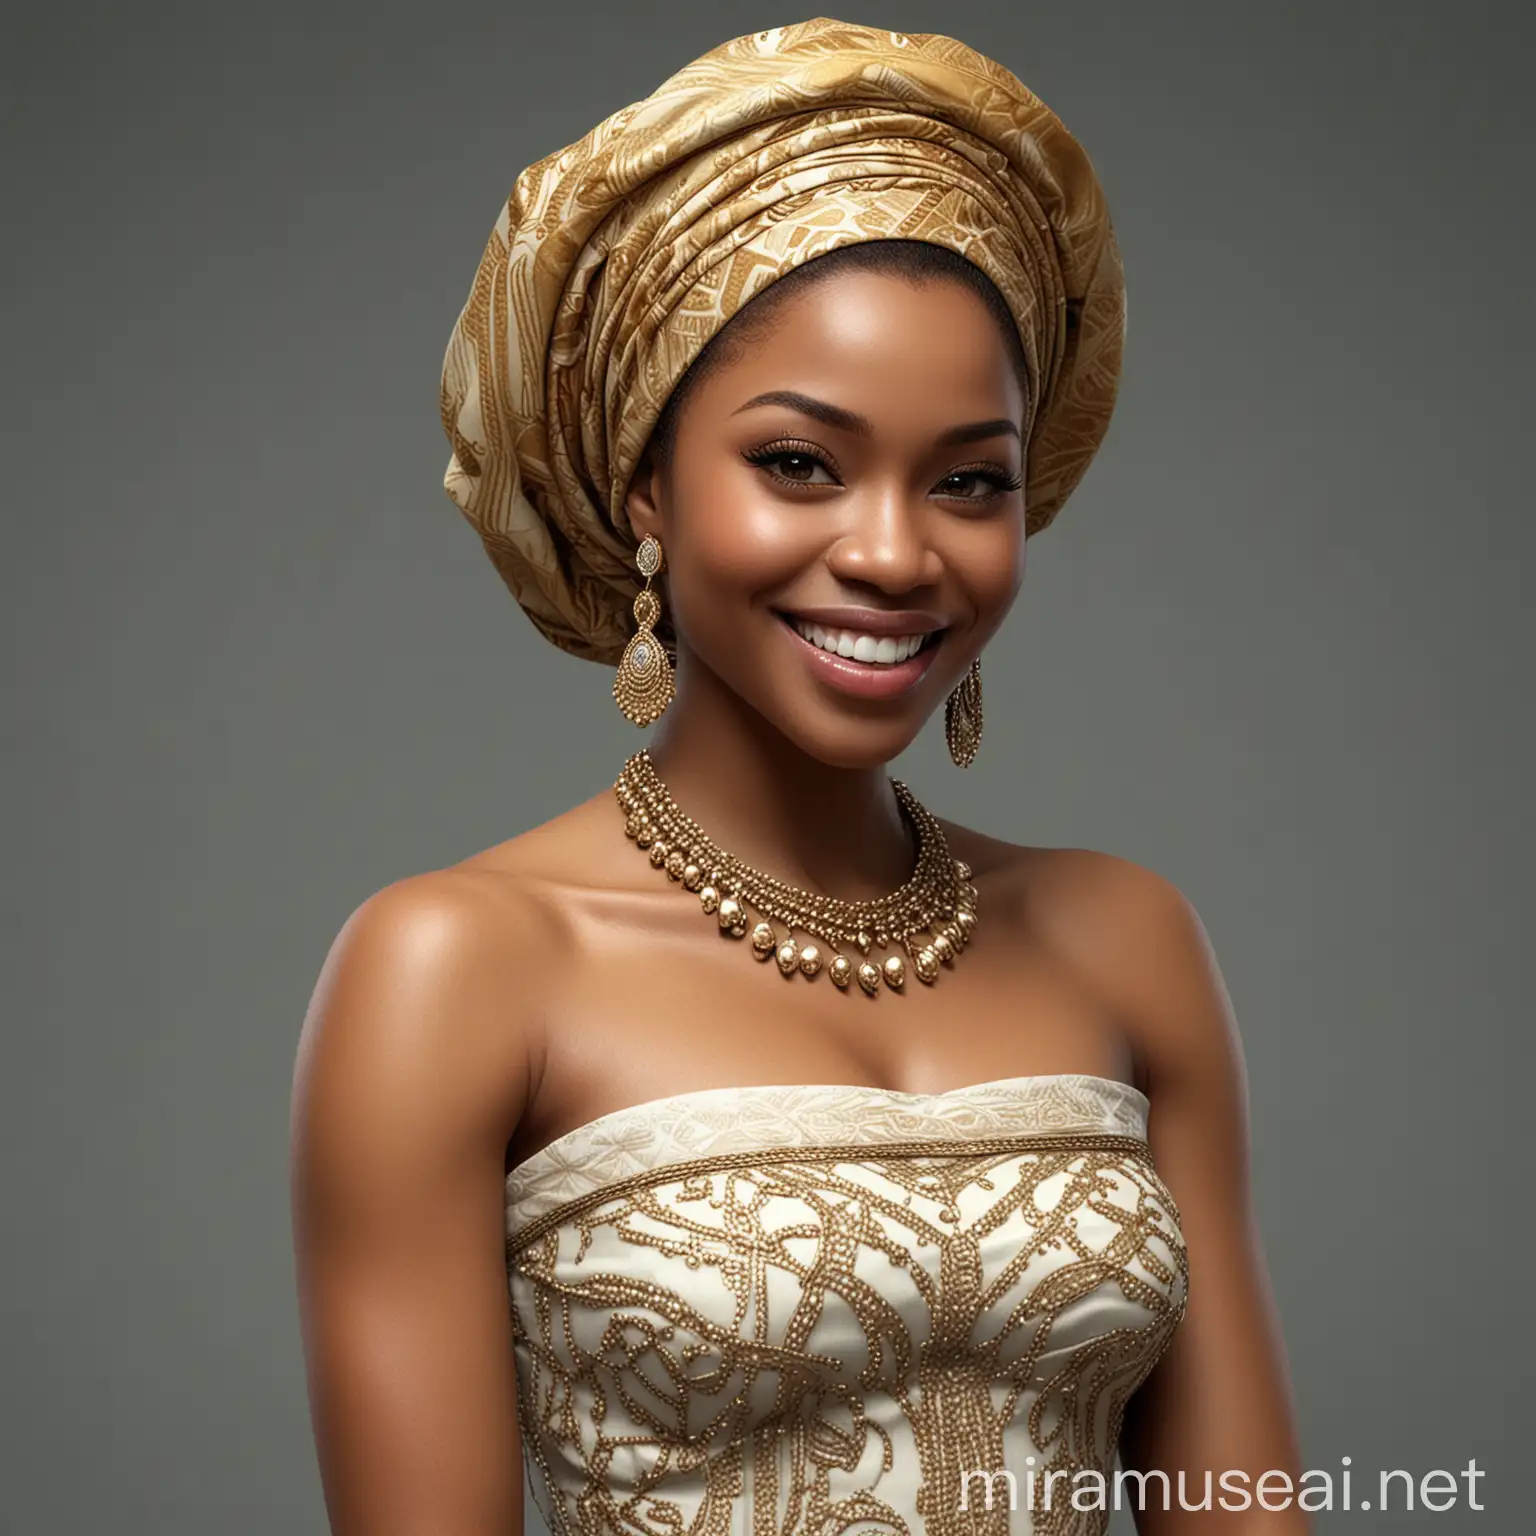 Radiant Nigerian Queen Smiling in Detailed Photorealistic Portrait